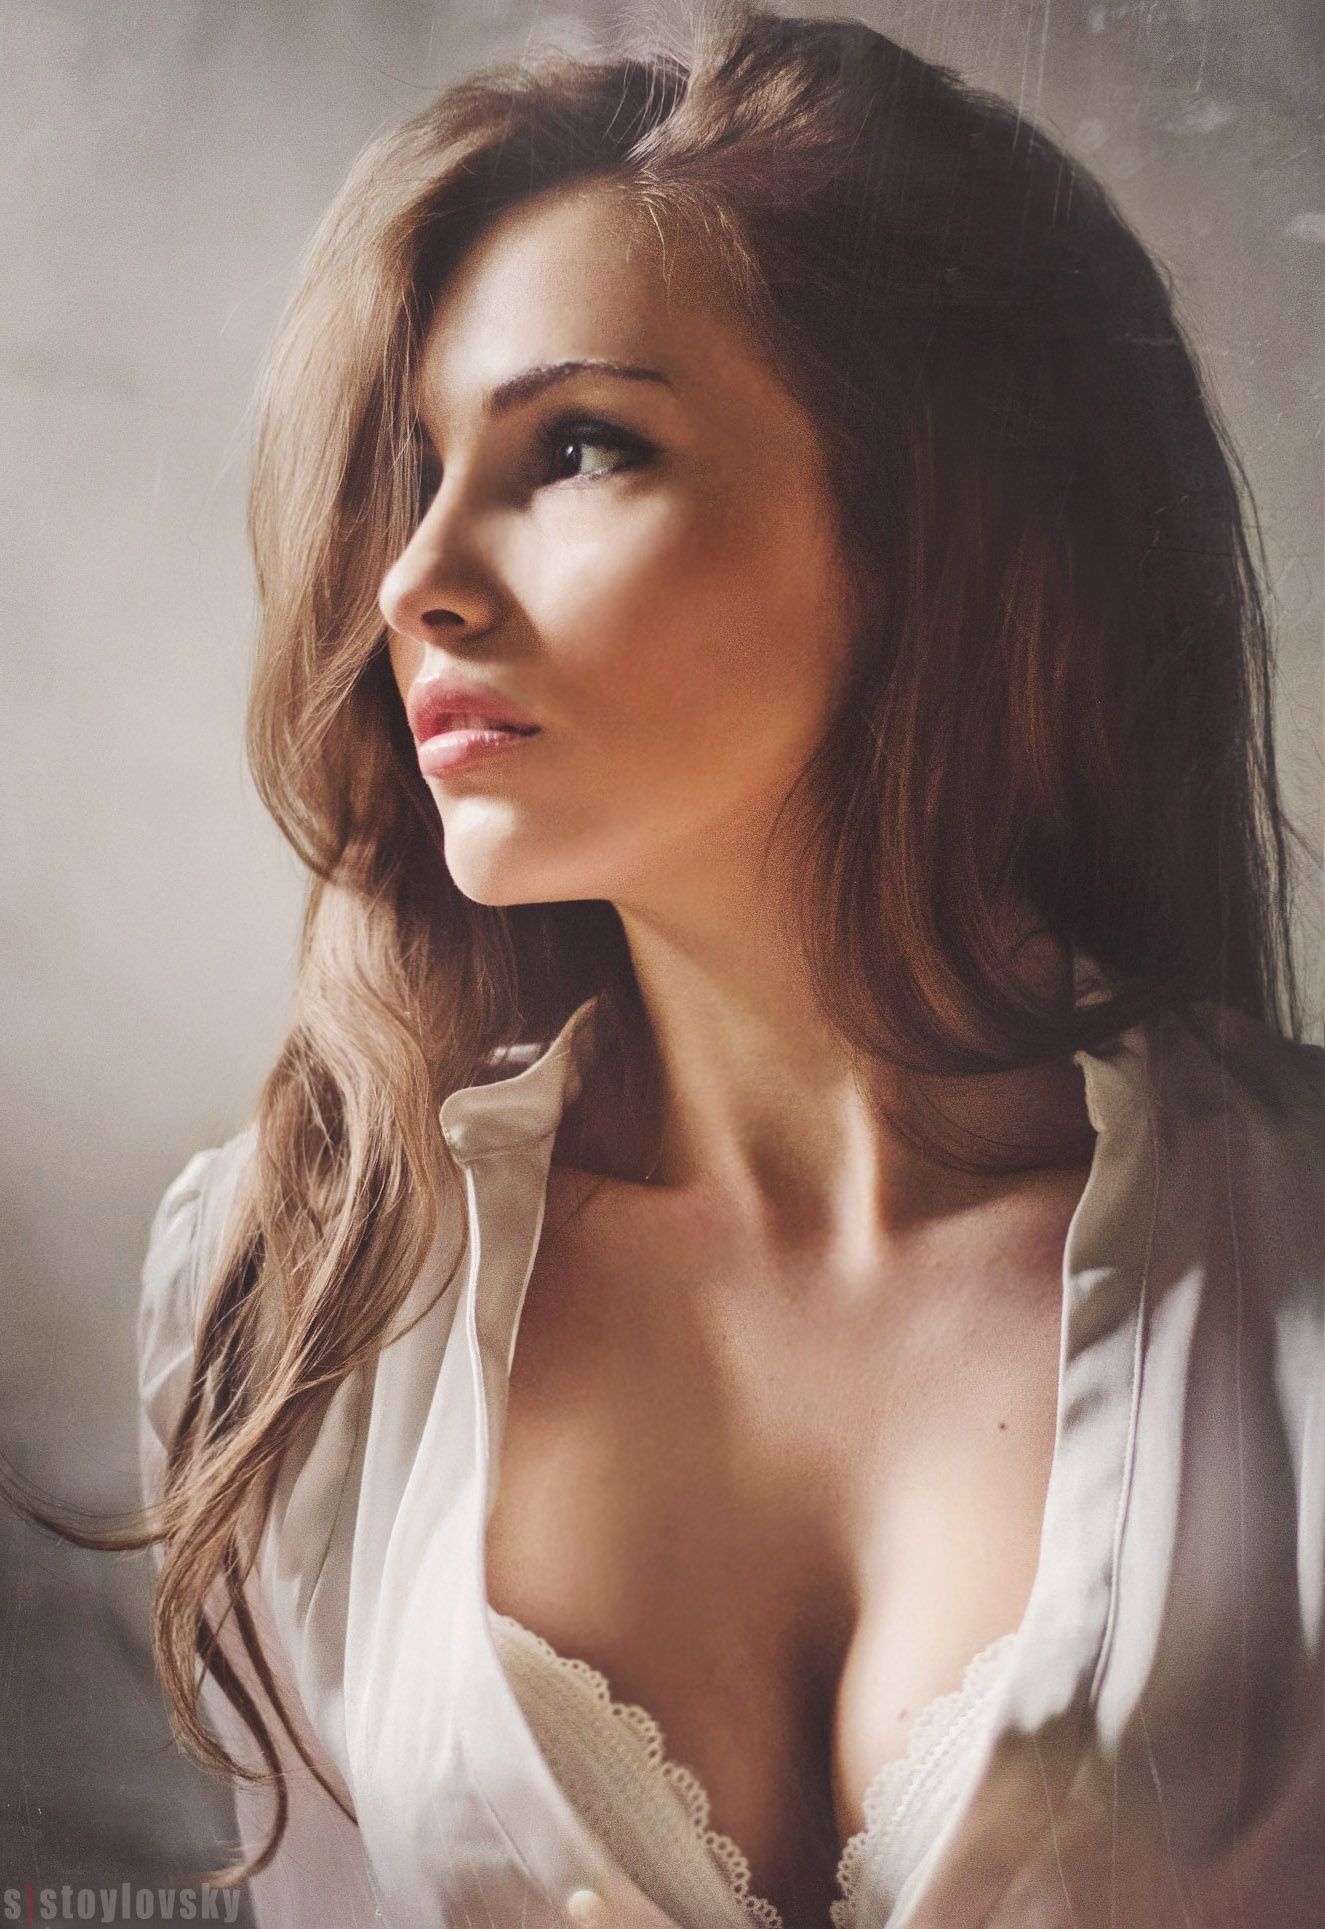 People 1325x1929 women model brunette cleavage long hair open shirt white bra looking away profile hair in face white shirt